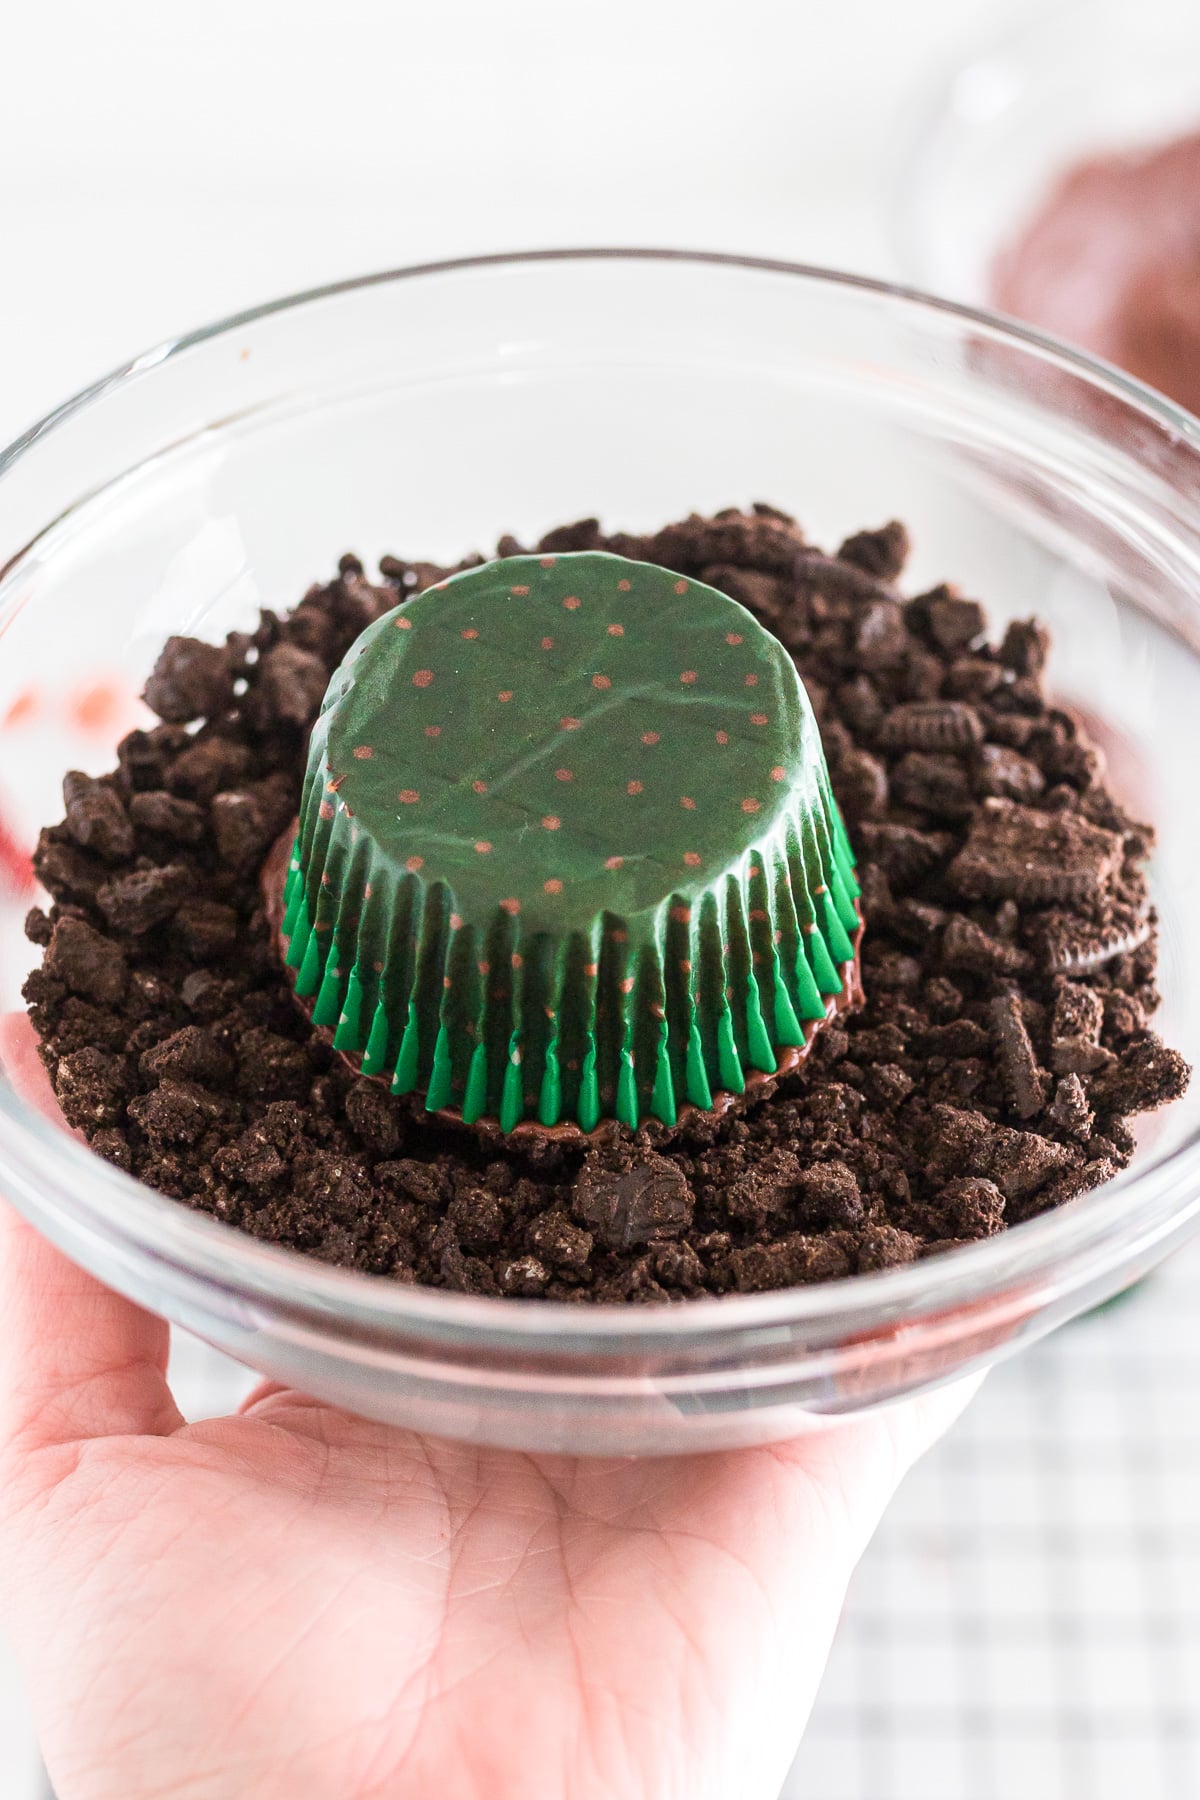 A chocolate cupcake upside down in a bowl of chocolate cookie crumbs.